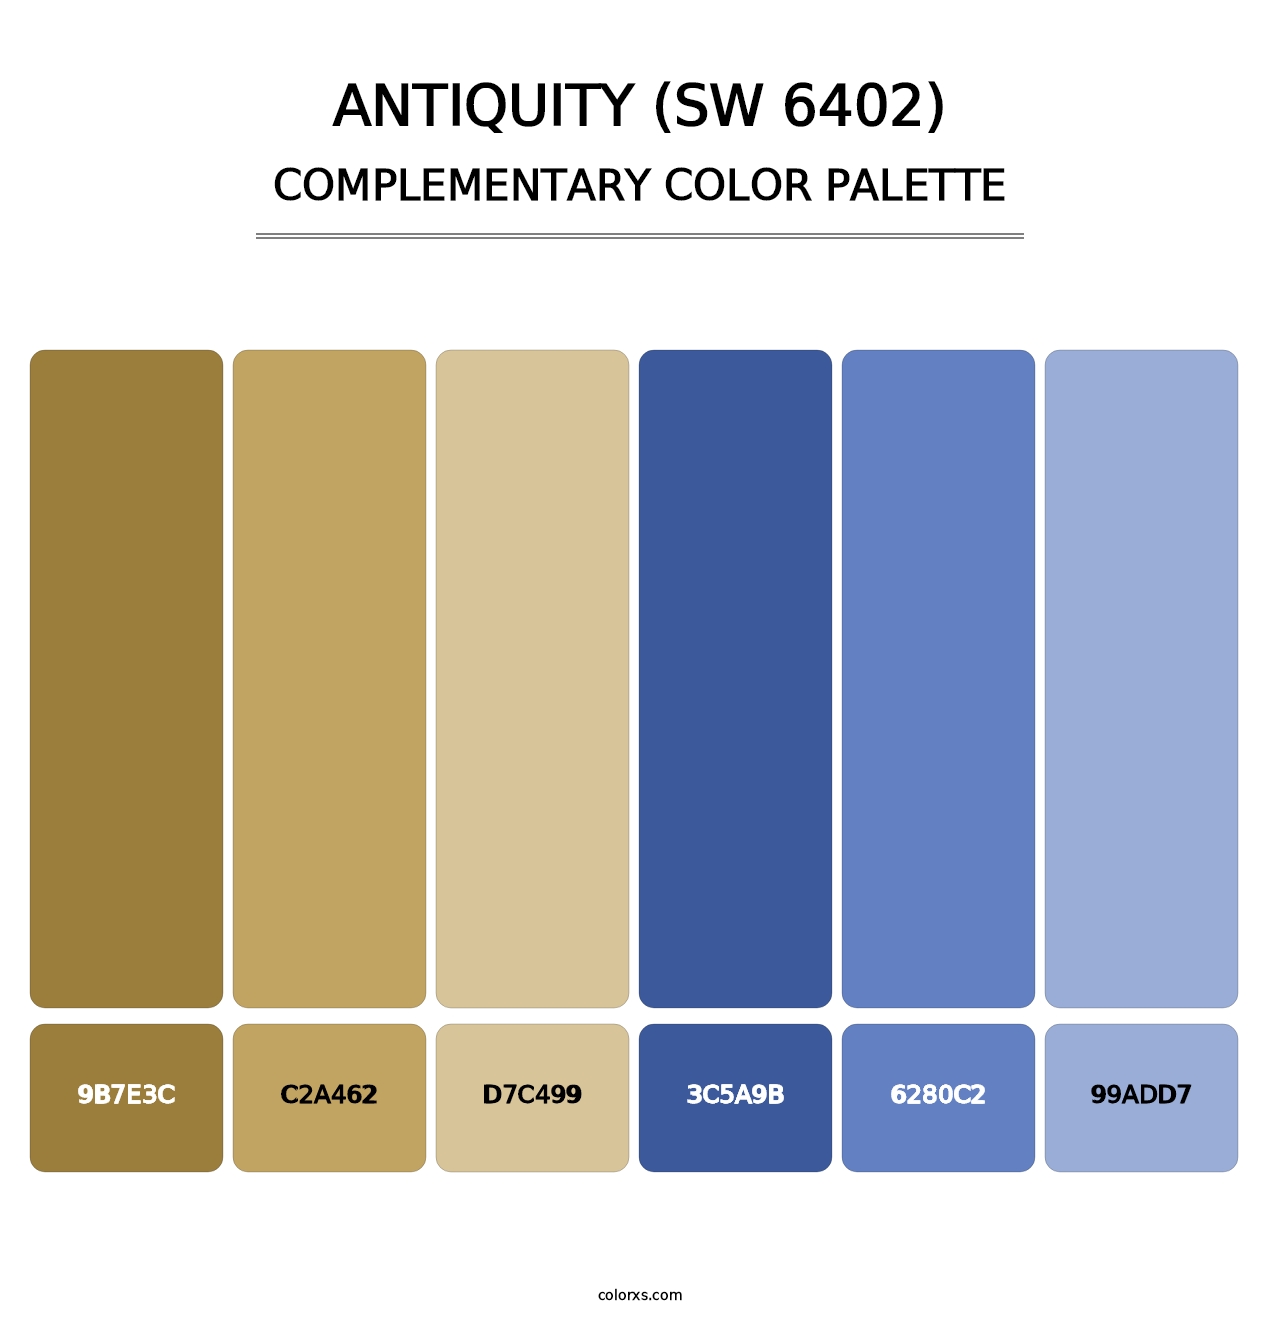 Antiquity (SW 6402) - Complementary Color Palette